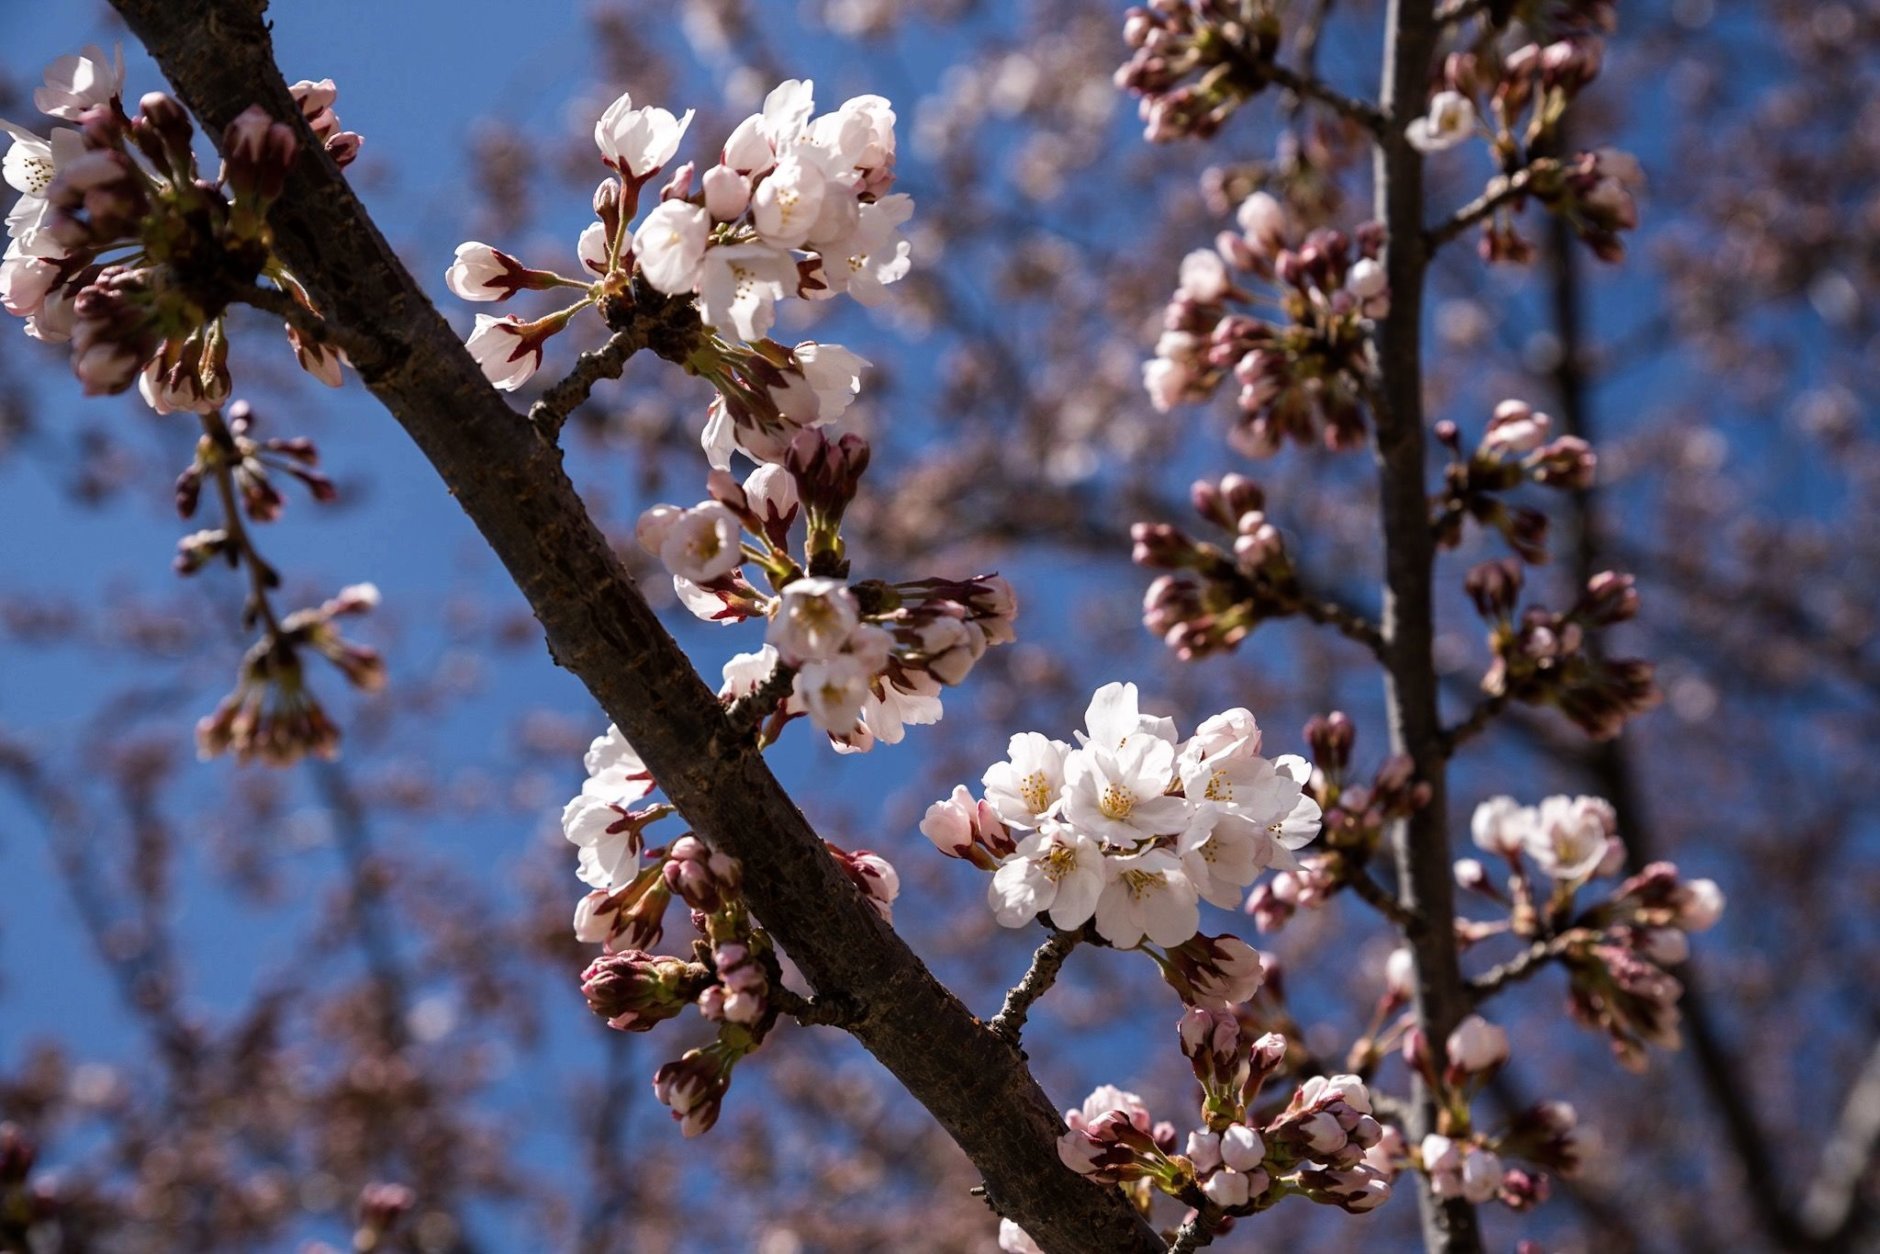 A cluster of white cherry blossoms in bloom on March 28. (WTOP/Alejandro Alvarez)